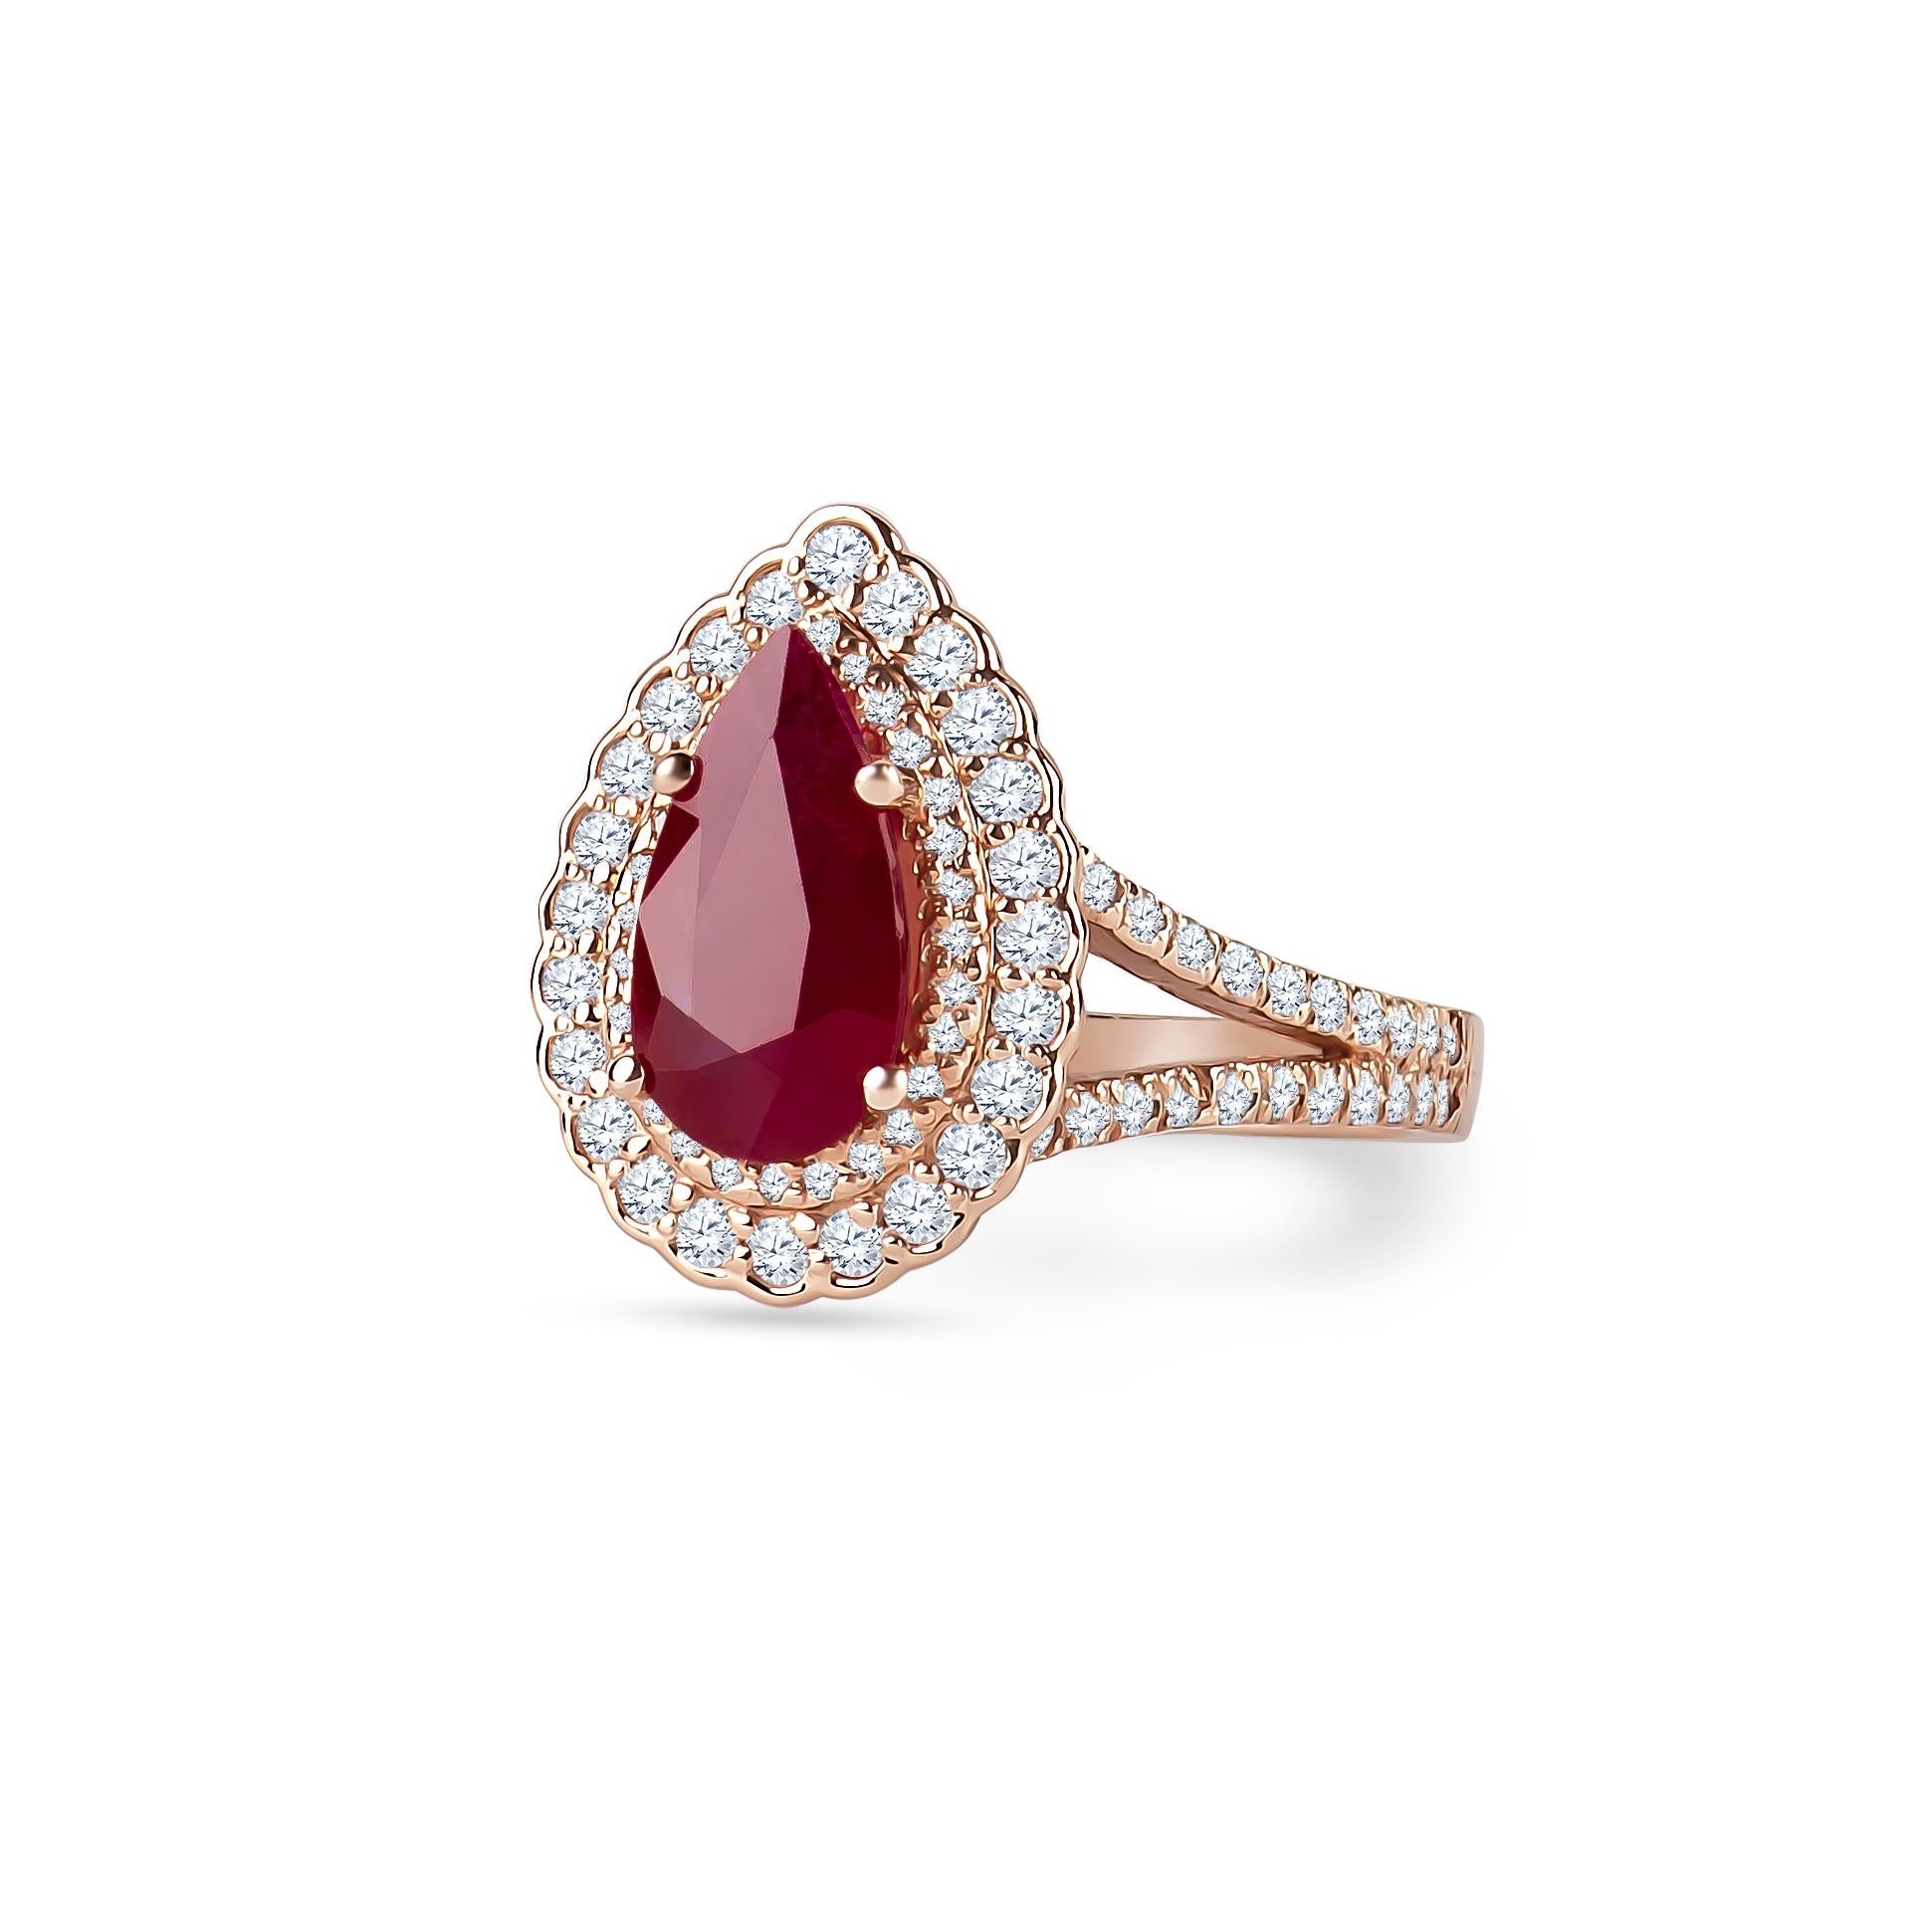 2.71 carat pear shaped ruby with 0.96 carats total weight of round brilliant diamonds in double halo form, set in a 14k rose gold ring with split shank. The ruby is guaranteed natural with standard heat treatment only. Diamond quality: G-I color,